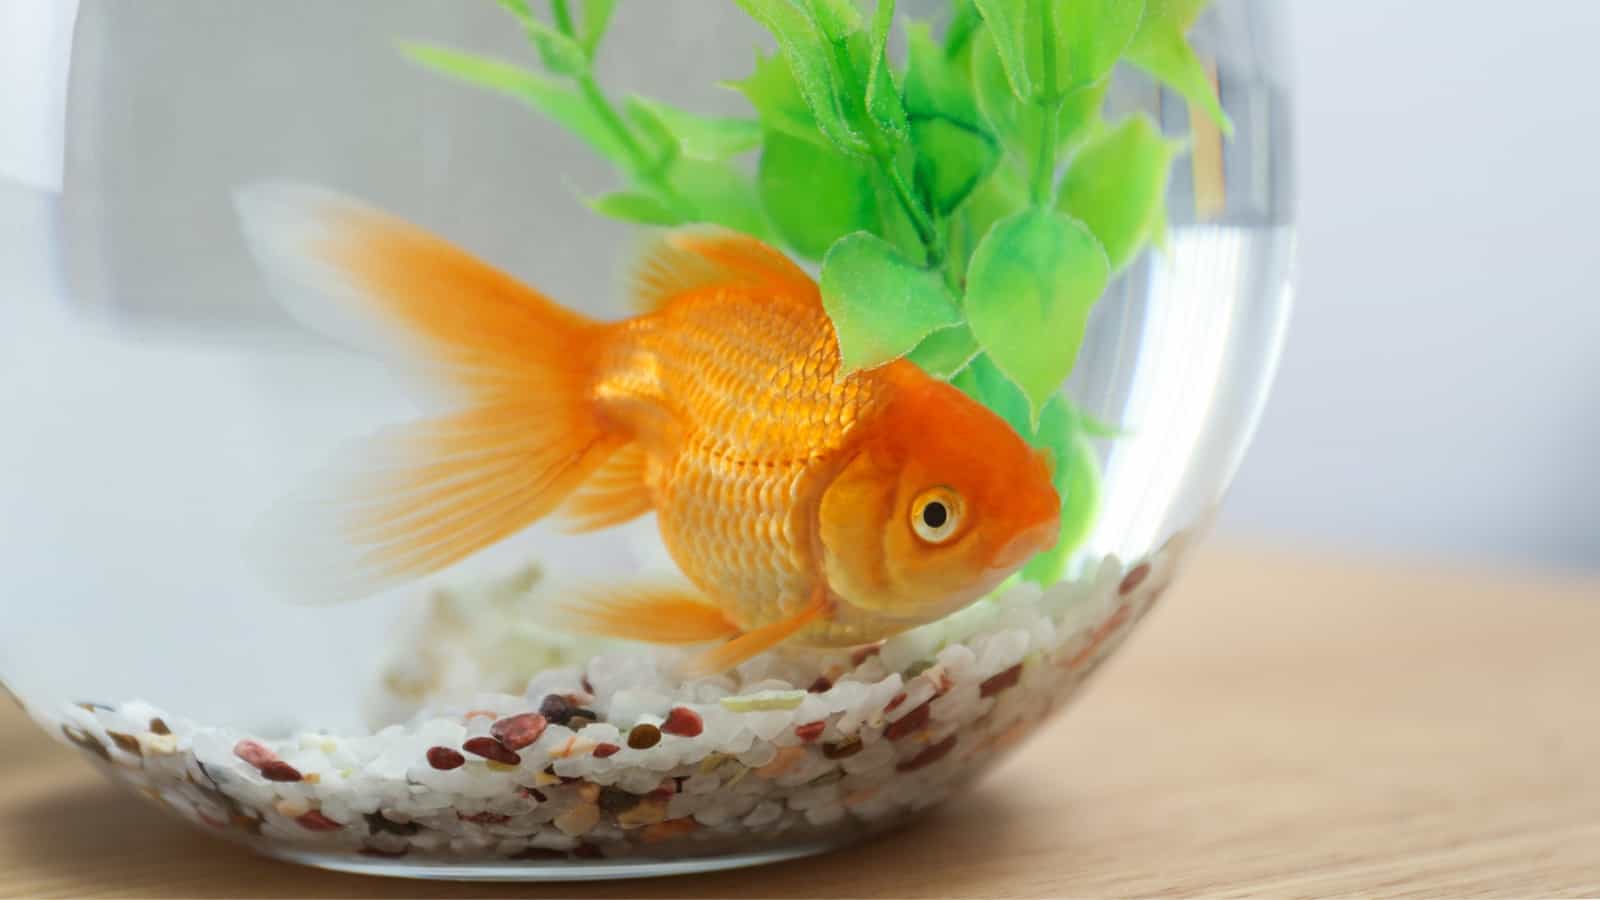 Why Goldfish Bowls Should Be Banned